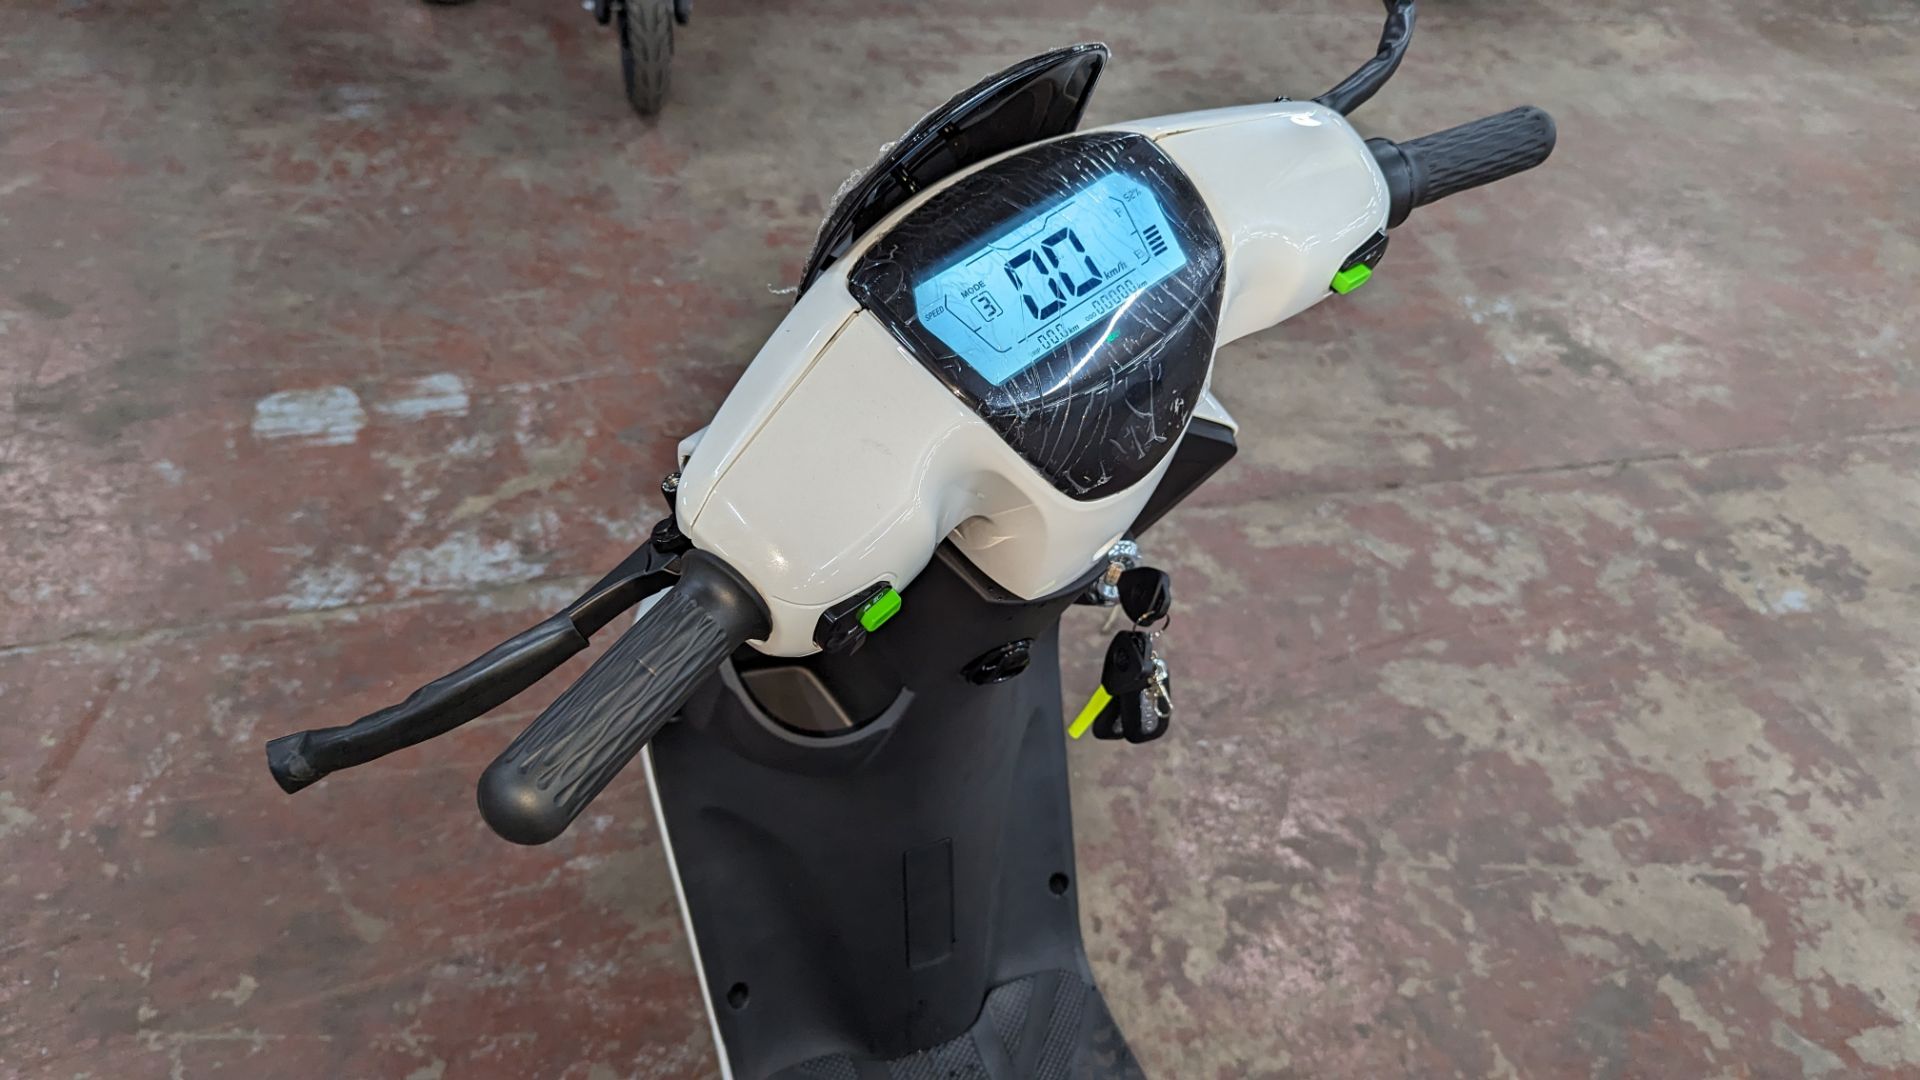 Model 18 Electric Bike: Zero (0) recorded miles, white body with black detailing, insulated box moun - Image 10 of 14